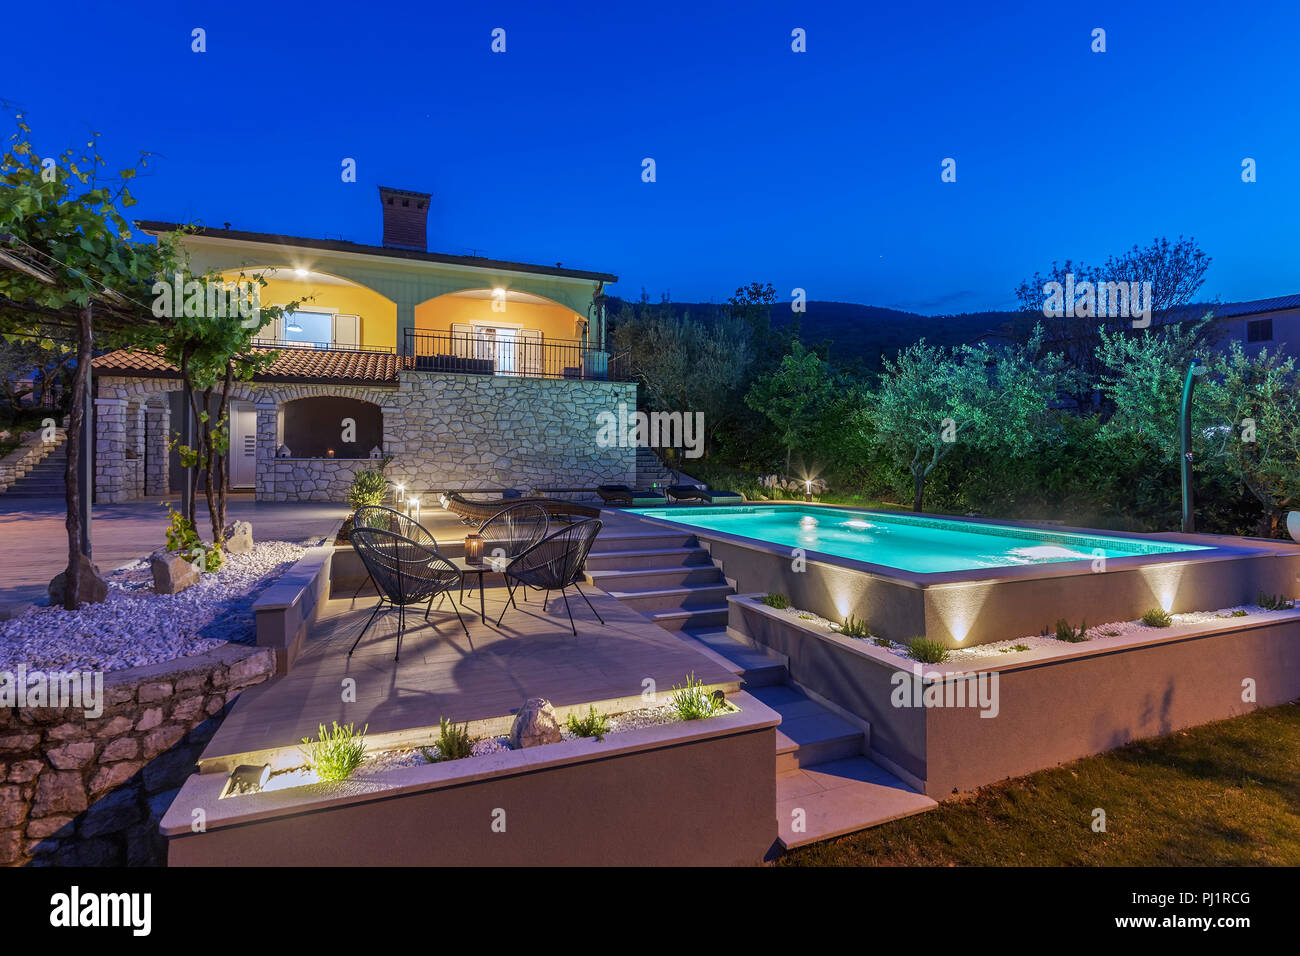 holiday home with swimming pool at night Stock Photo